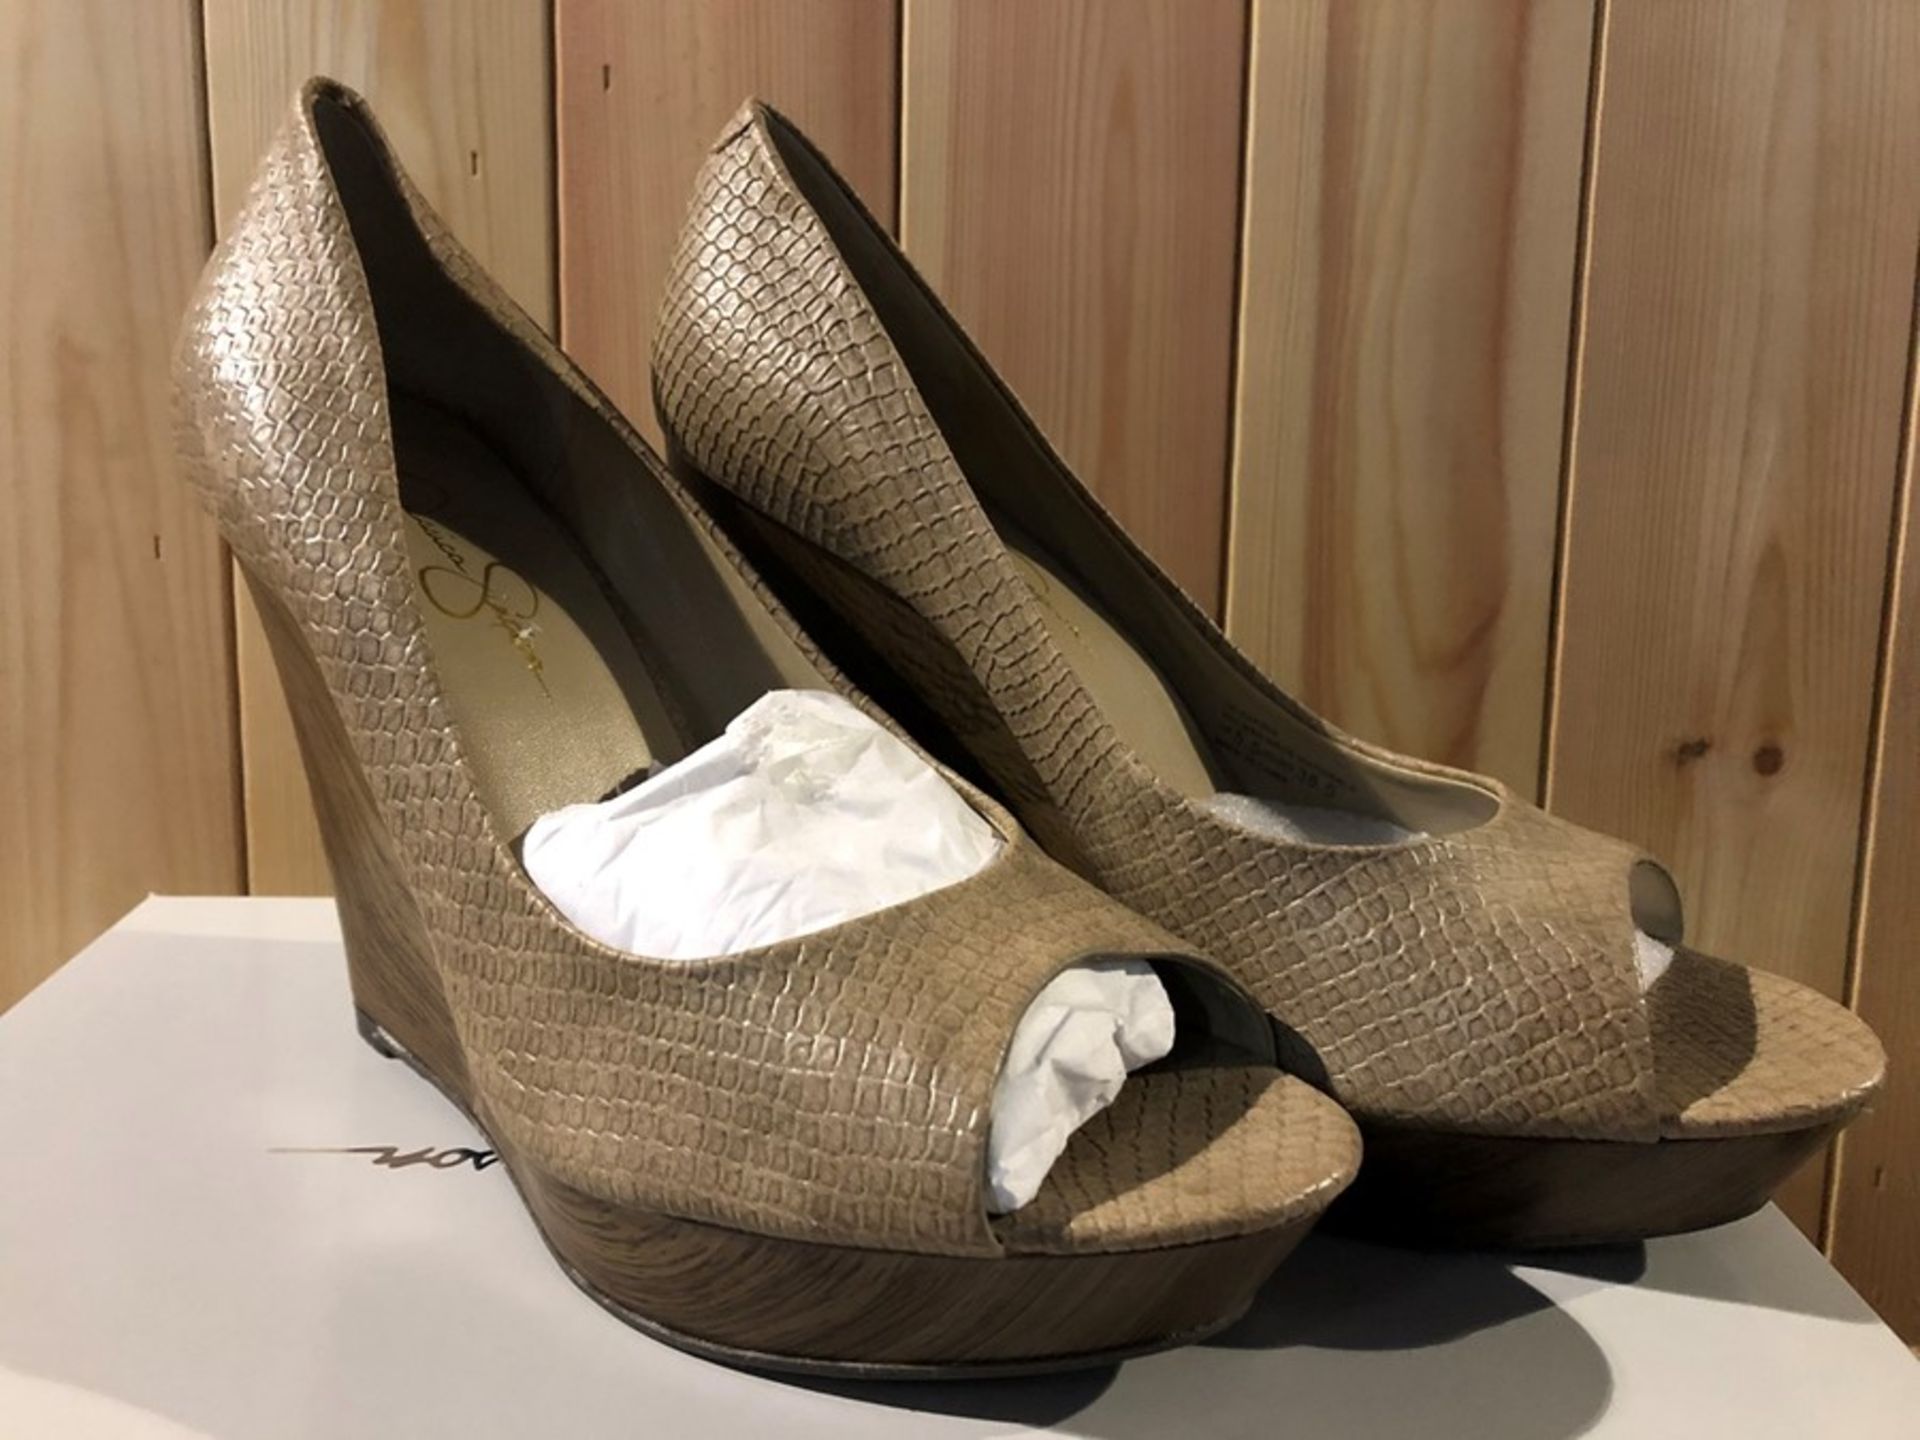 1 BOXED PAIR OF WOMEN'S JESSICA SIMPSON TK-KAPRIX HEELS IN TAUPE FISH SCALE / SIZE: 5.5 UK (PUBLIC